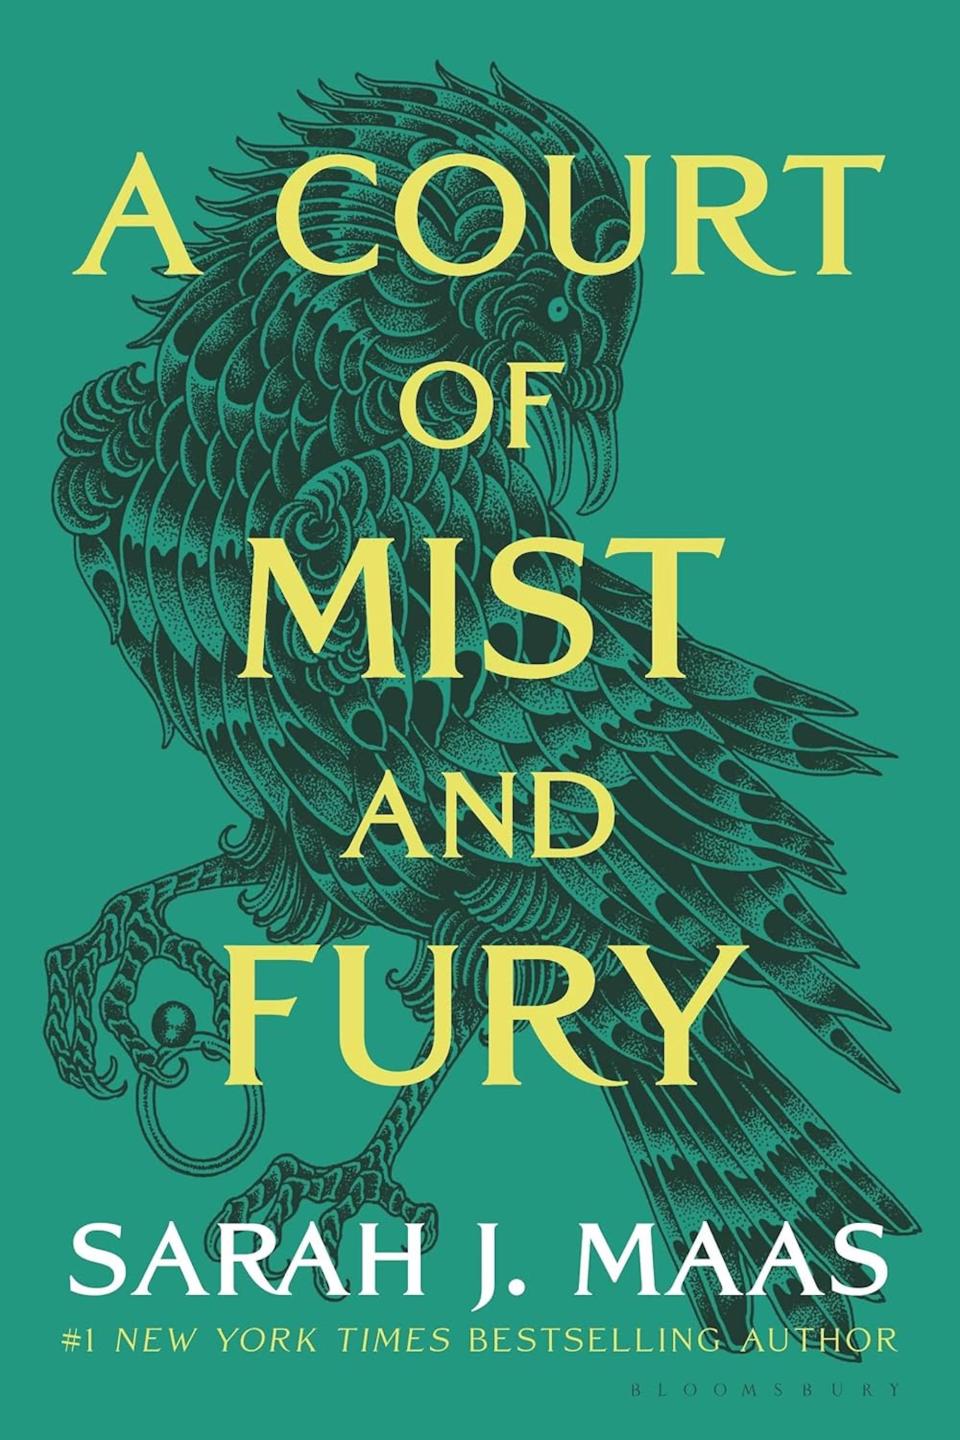 The cover of "A Court of Mist and Fury" by Sarah J. Maas.